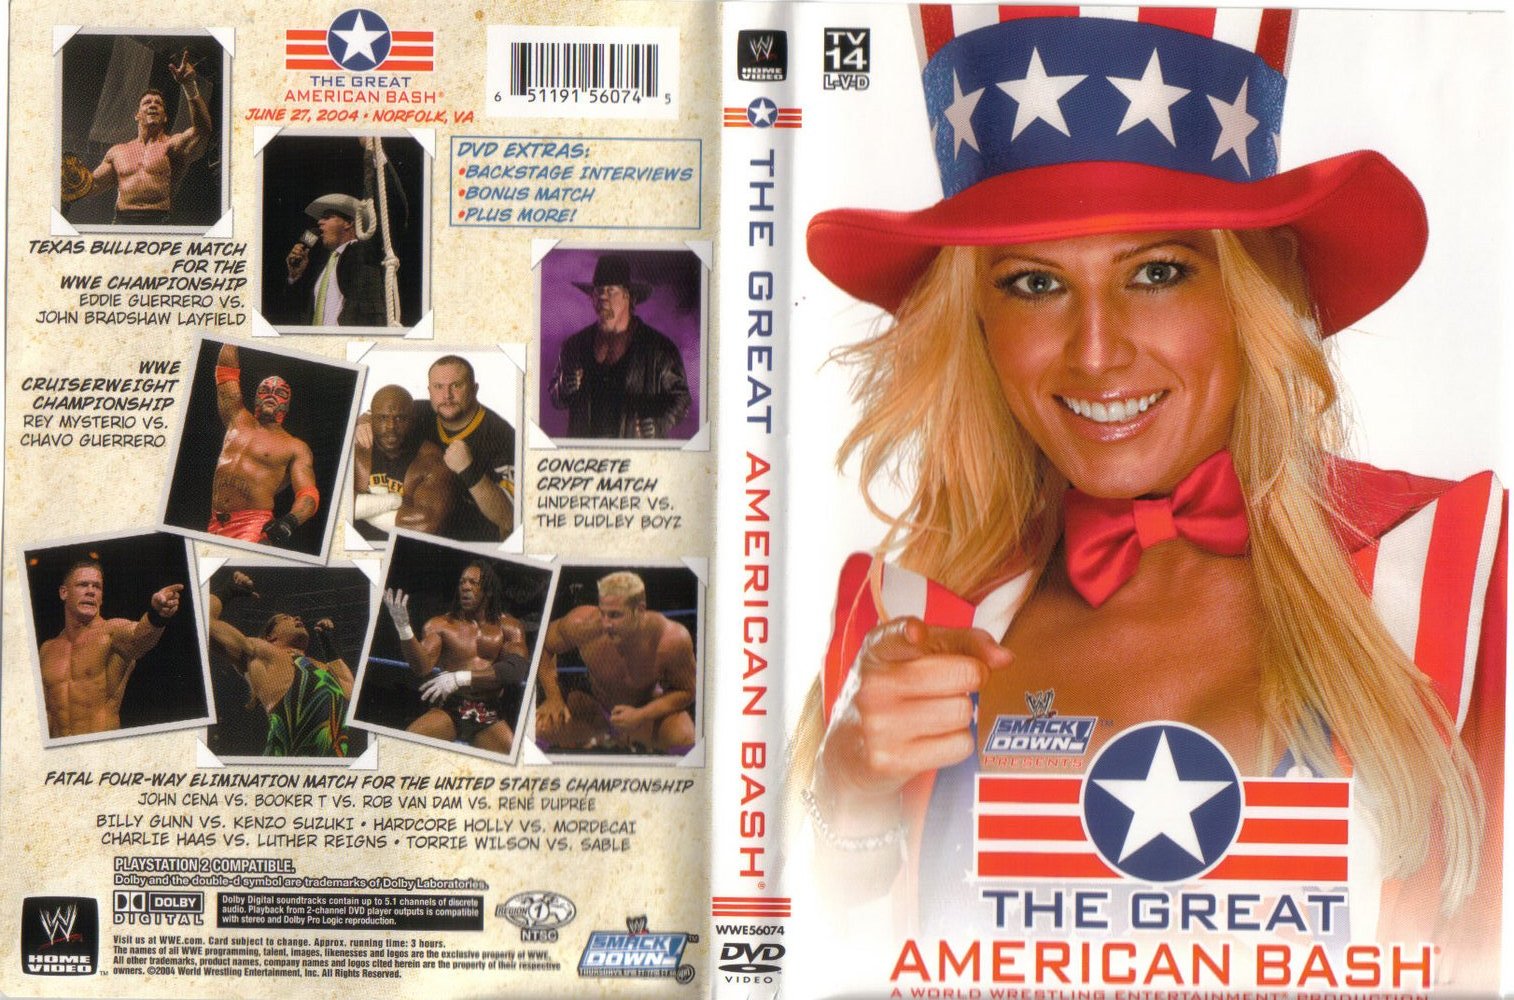 Jaquette DVD WWE Great American Bash